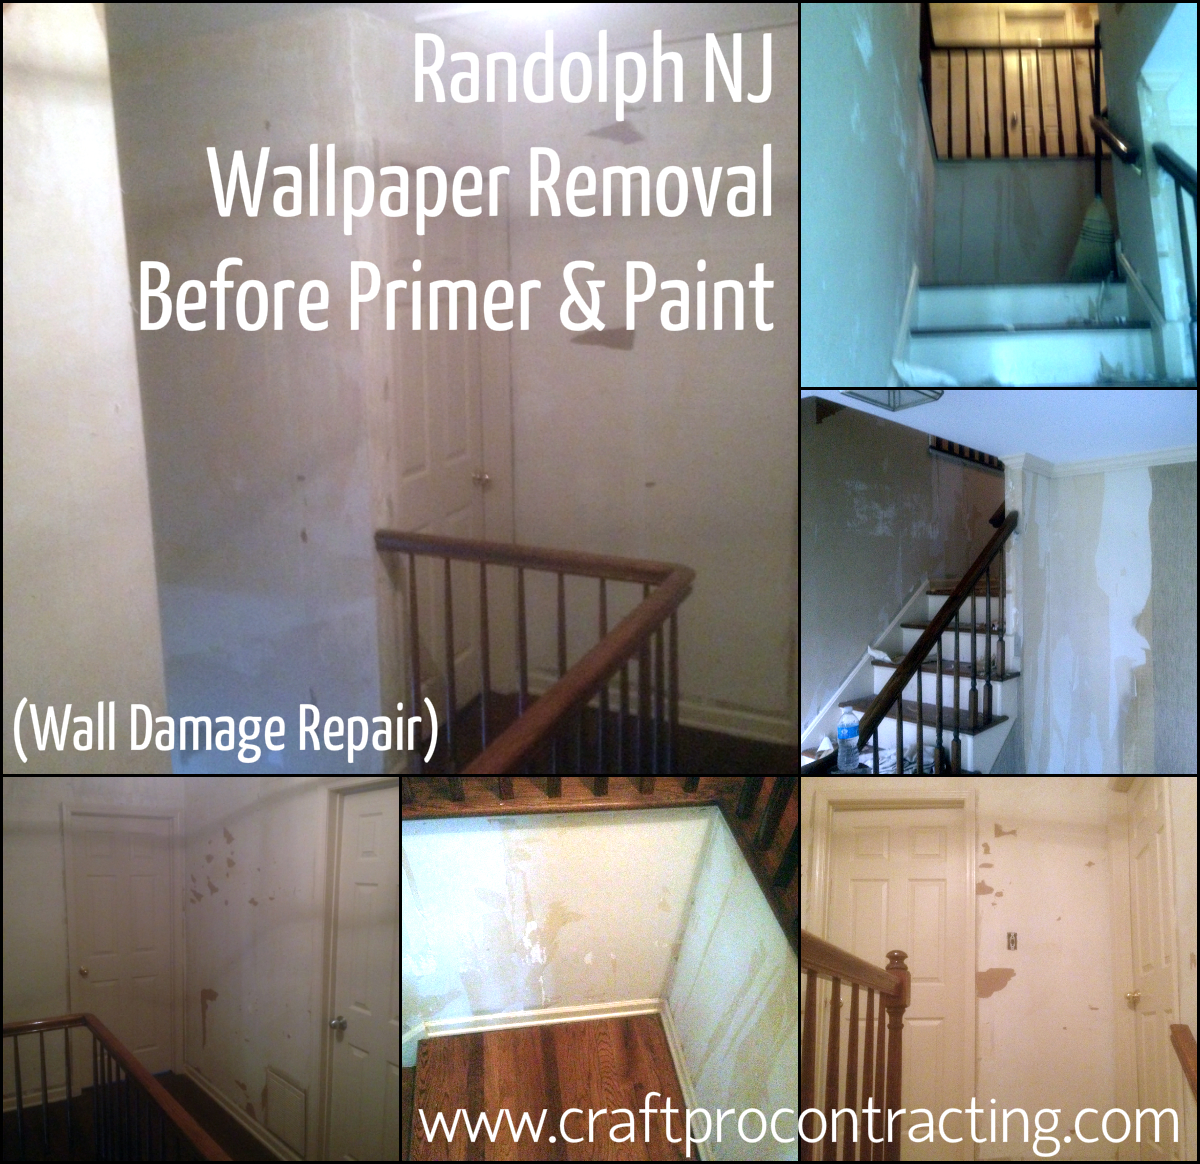 Painting Wallpaper Removal And Wall Damage Before Priming